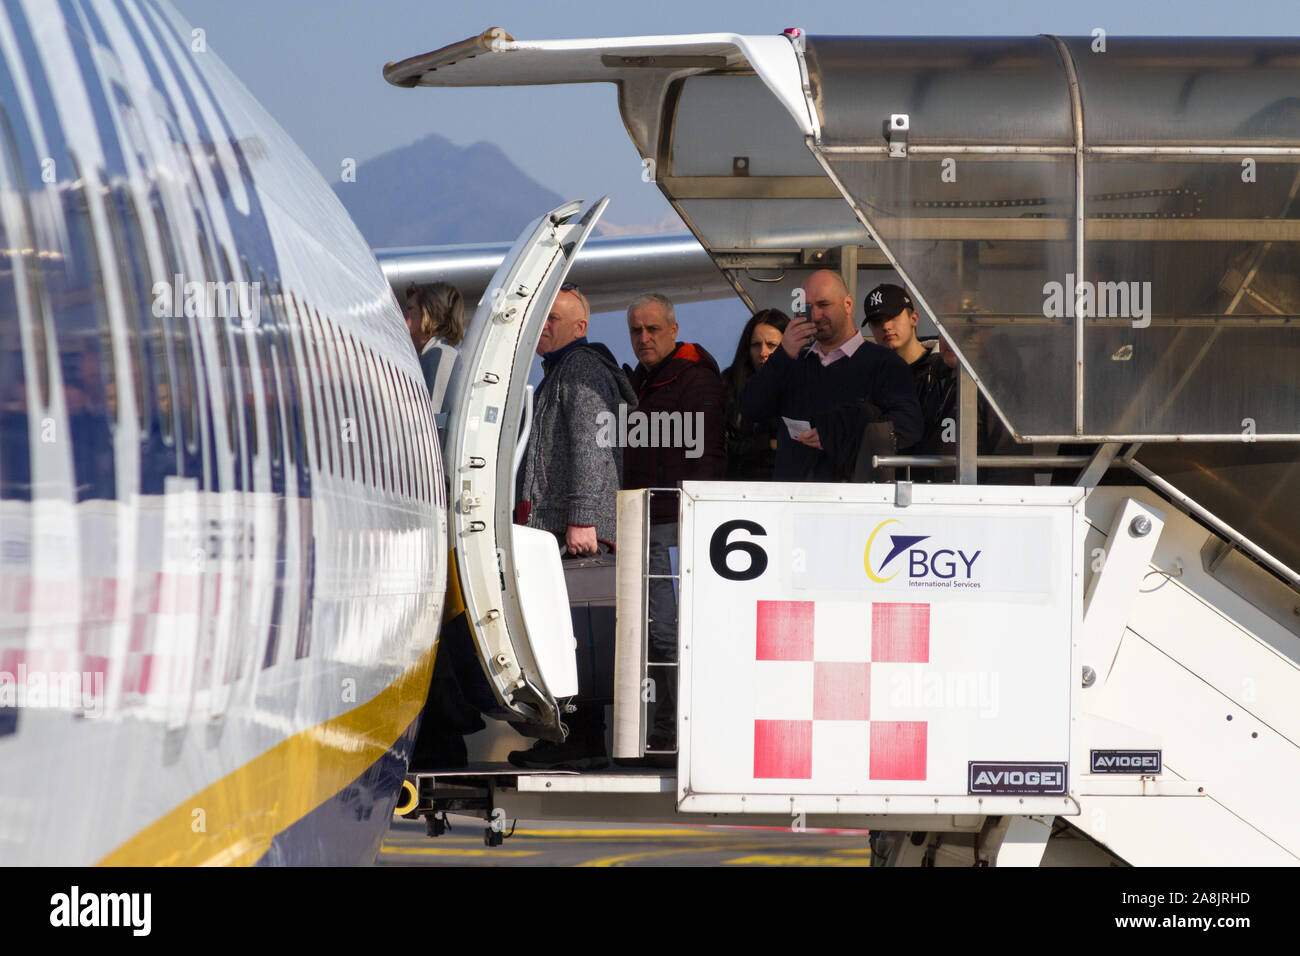 A Ryanair Boeing 737-800 aircraft parked at the Milano Bergamo airport. People are boarding the plane. Stock Photo